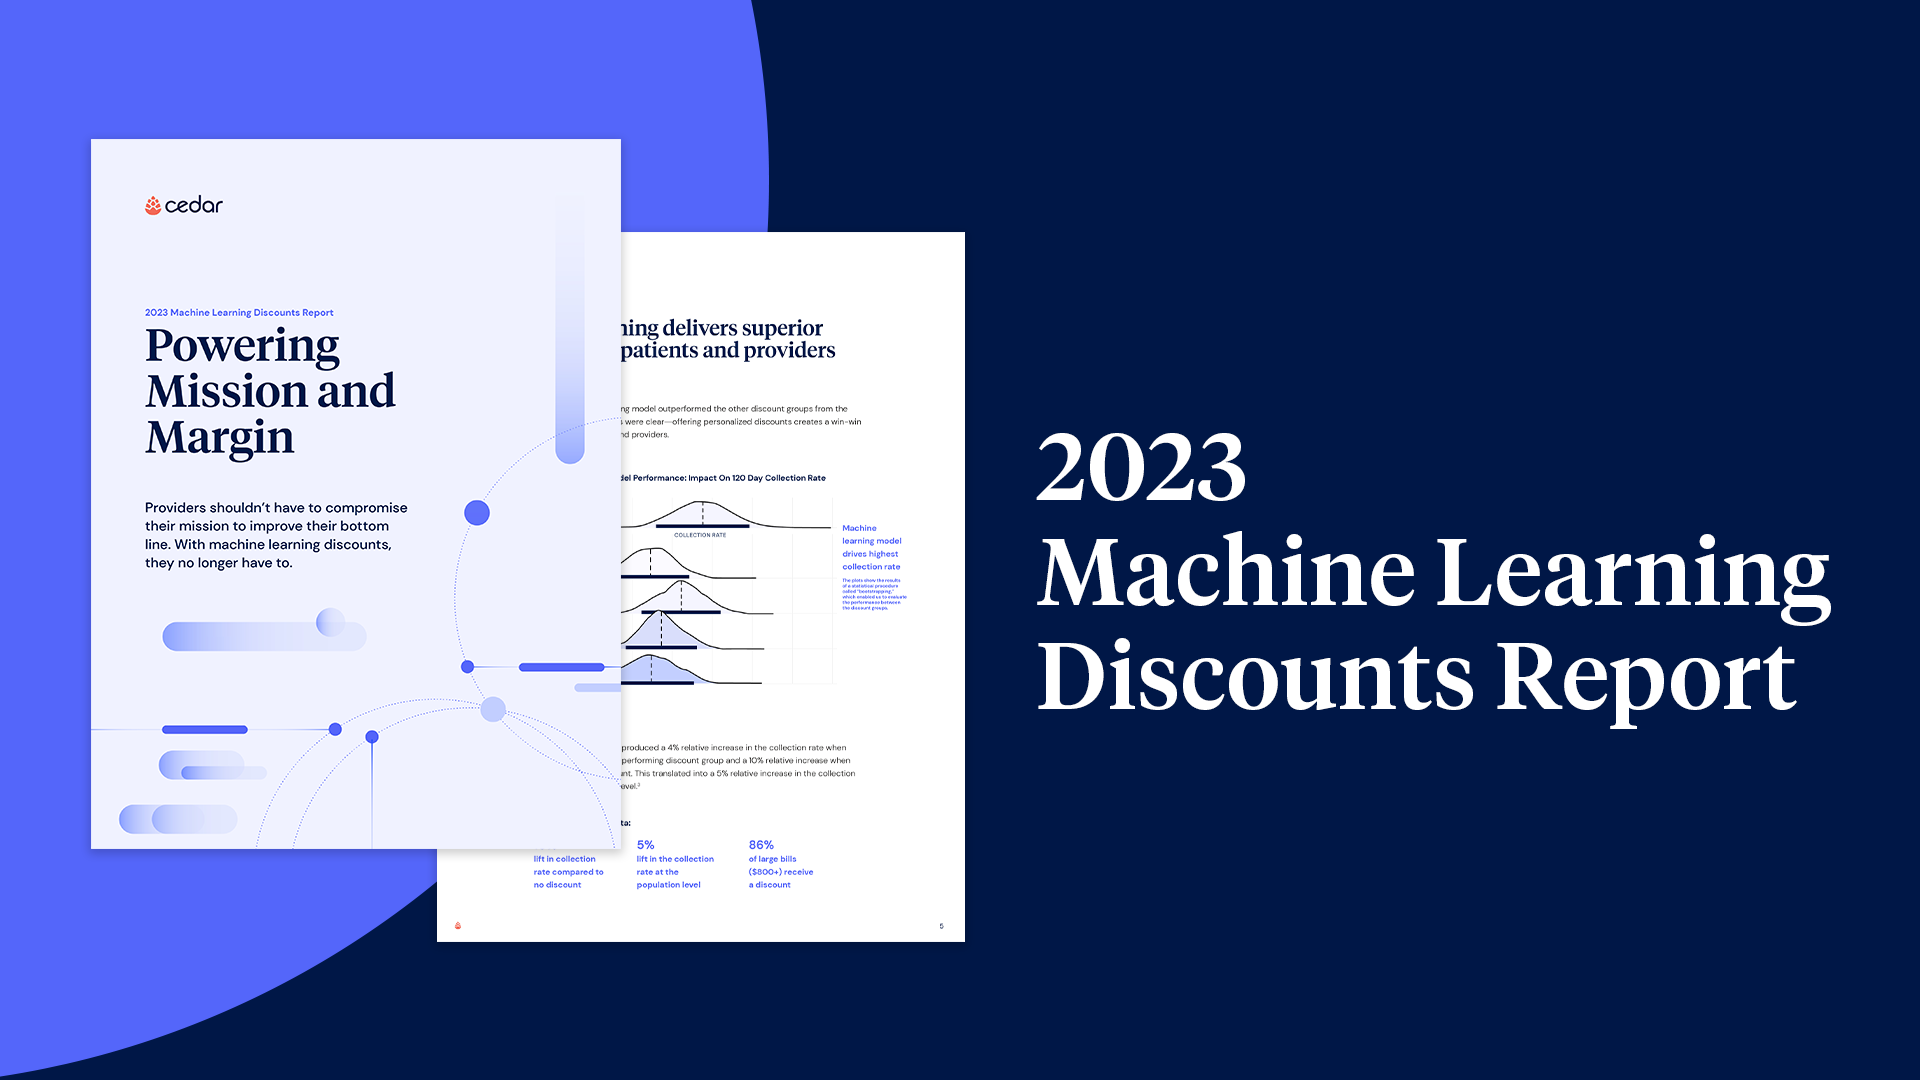 Machine Learning Discounts: Powering Mission and Margin